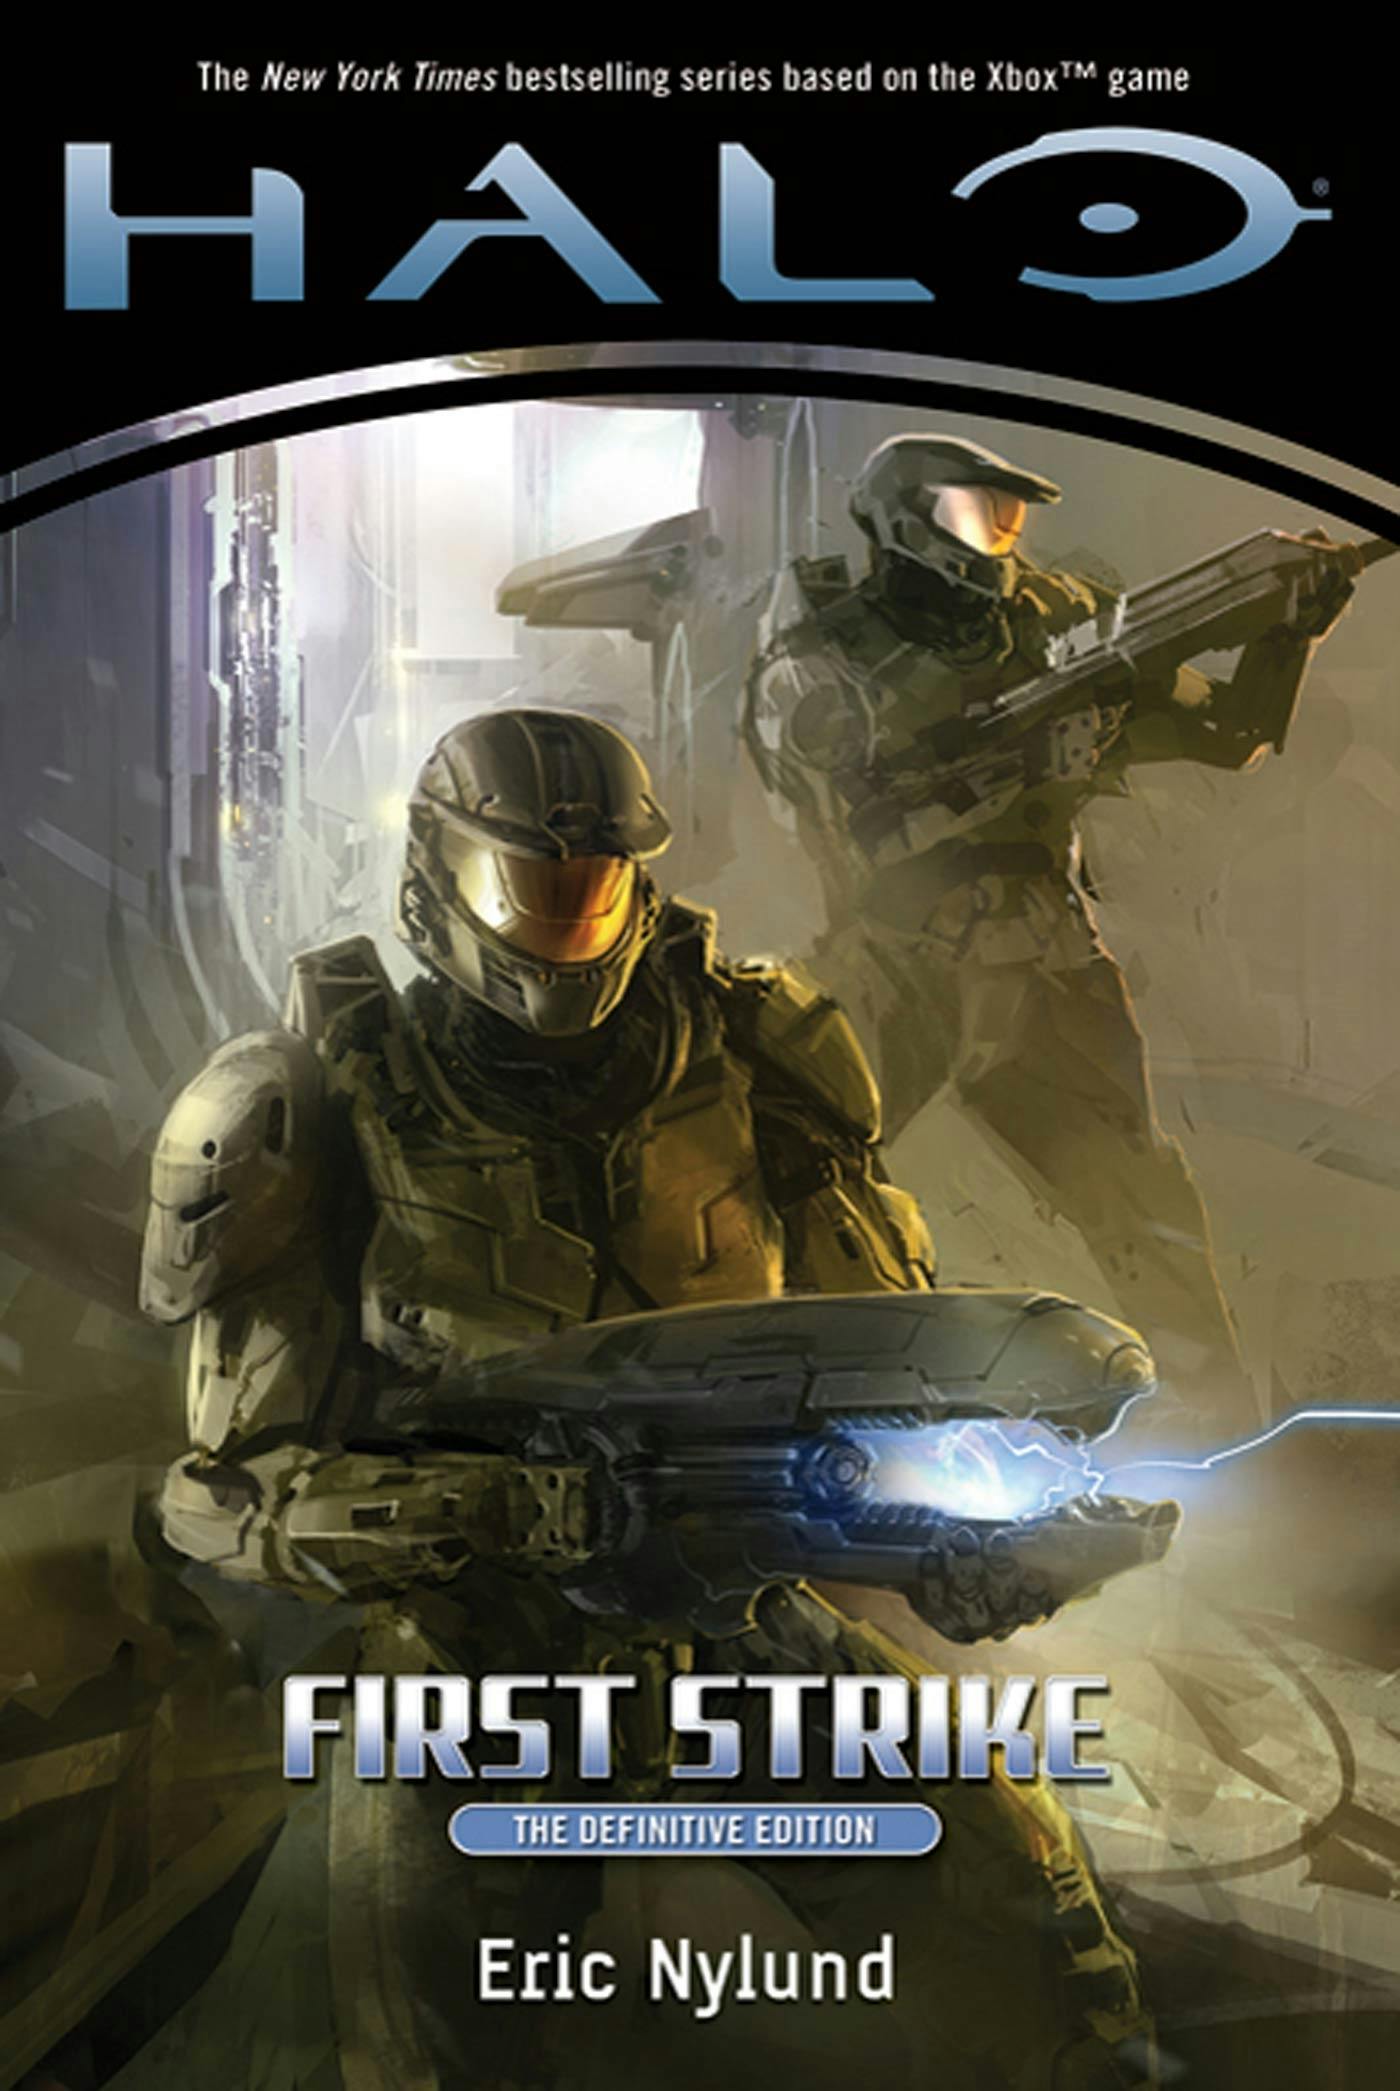 Cover for the book titled as: Halo: First Strike